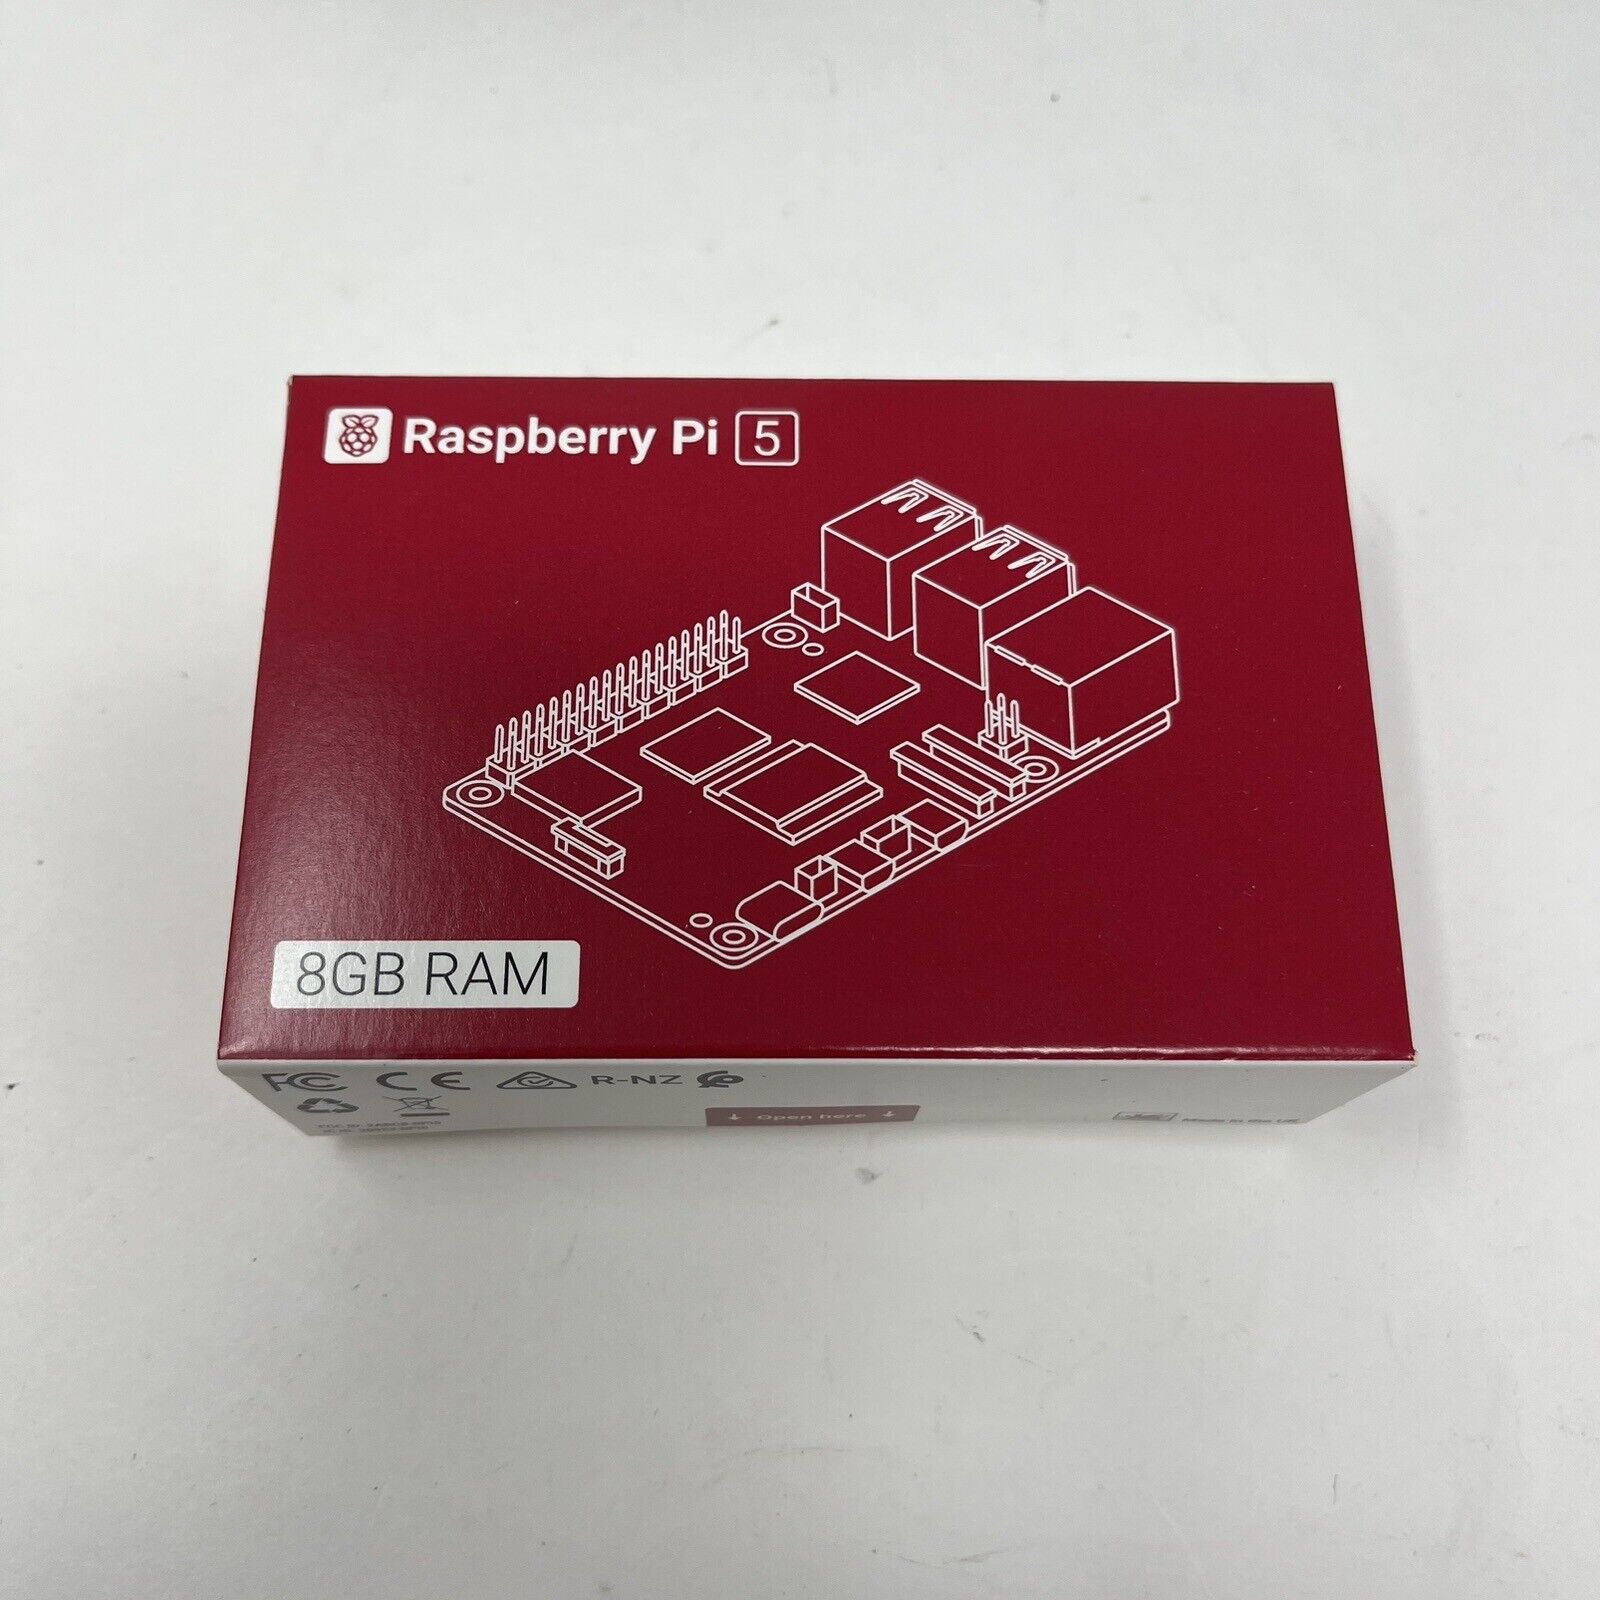 BRAND NEW RASPBERRY Pi 5  8GB RAM UNOPENED IN HAND. WILL SHIP WITHIN 24 HOURS